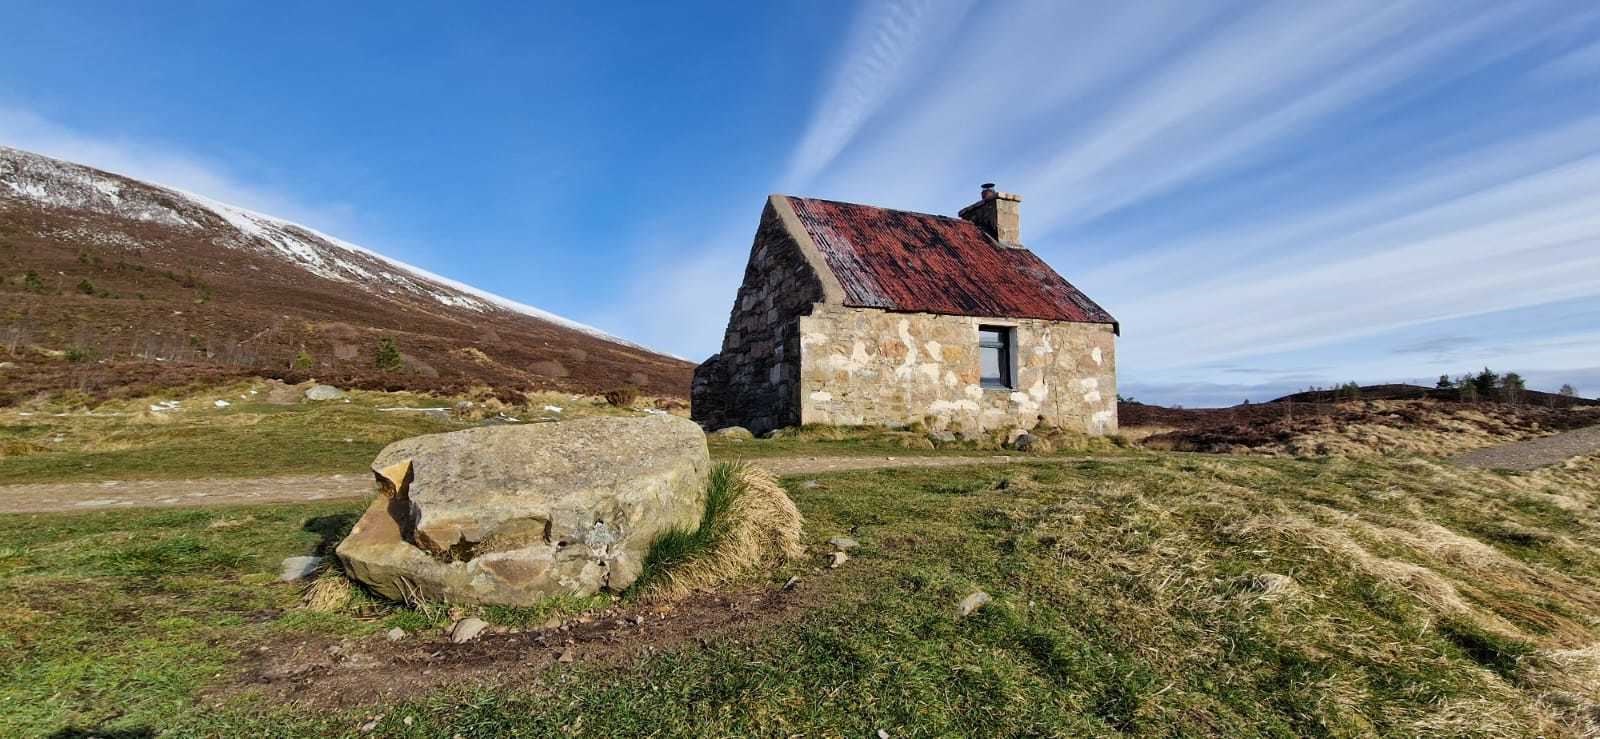 Ryvoan bothy will be closed on several occasions this spring to replace its porch. Picture: John Davidson